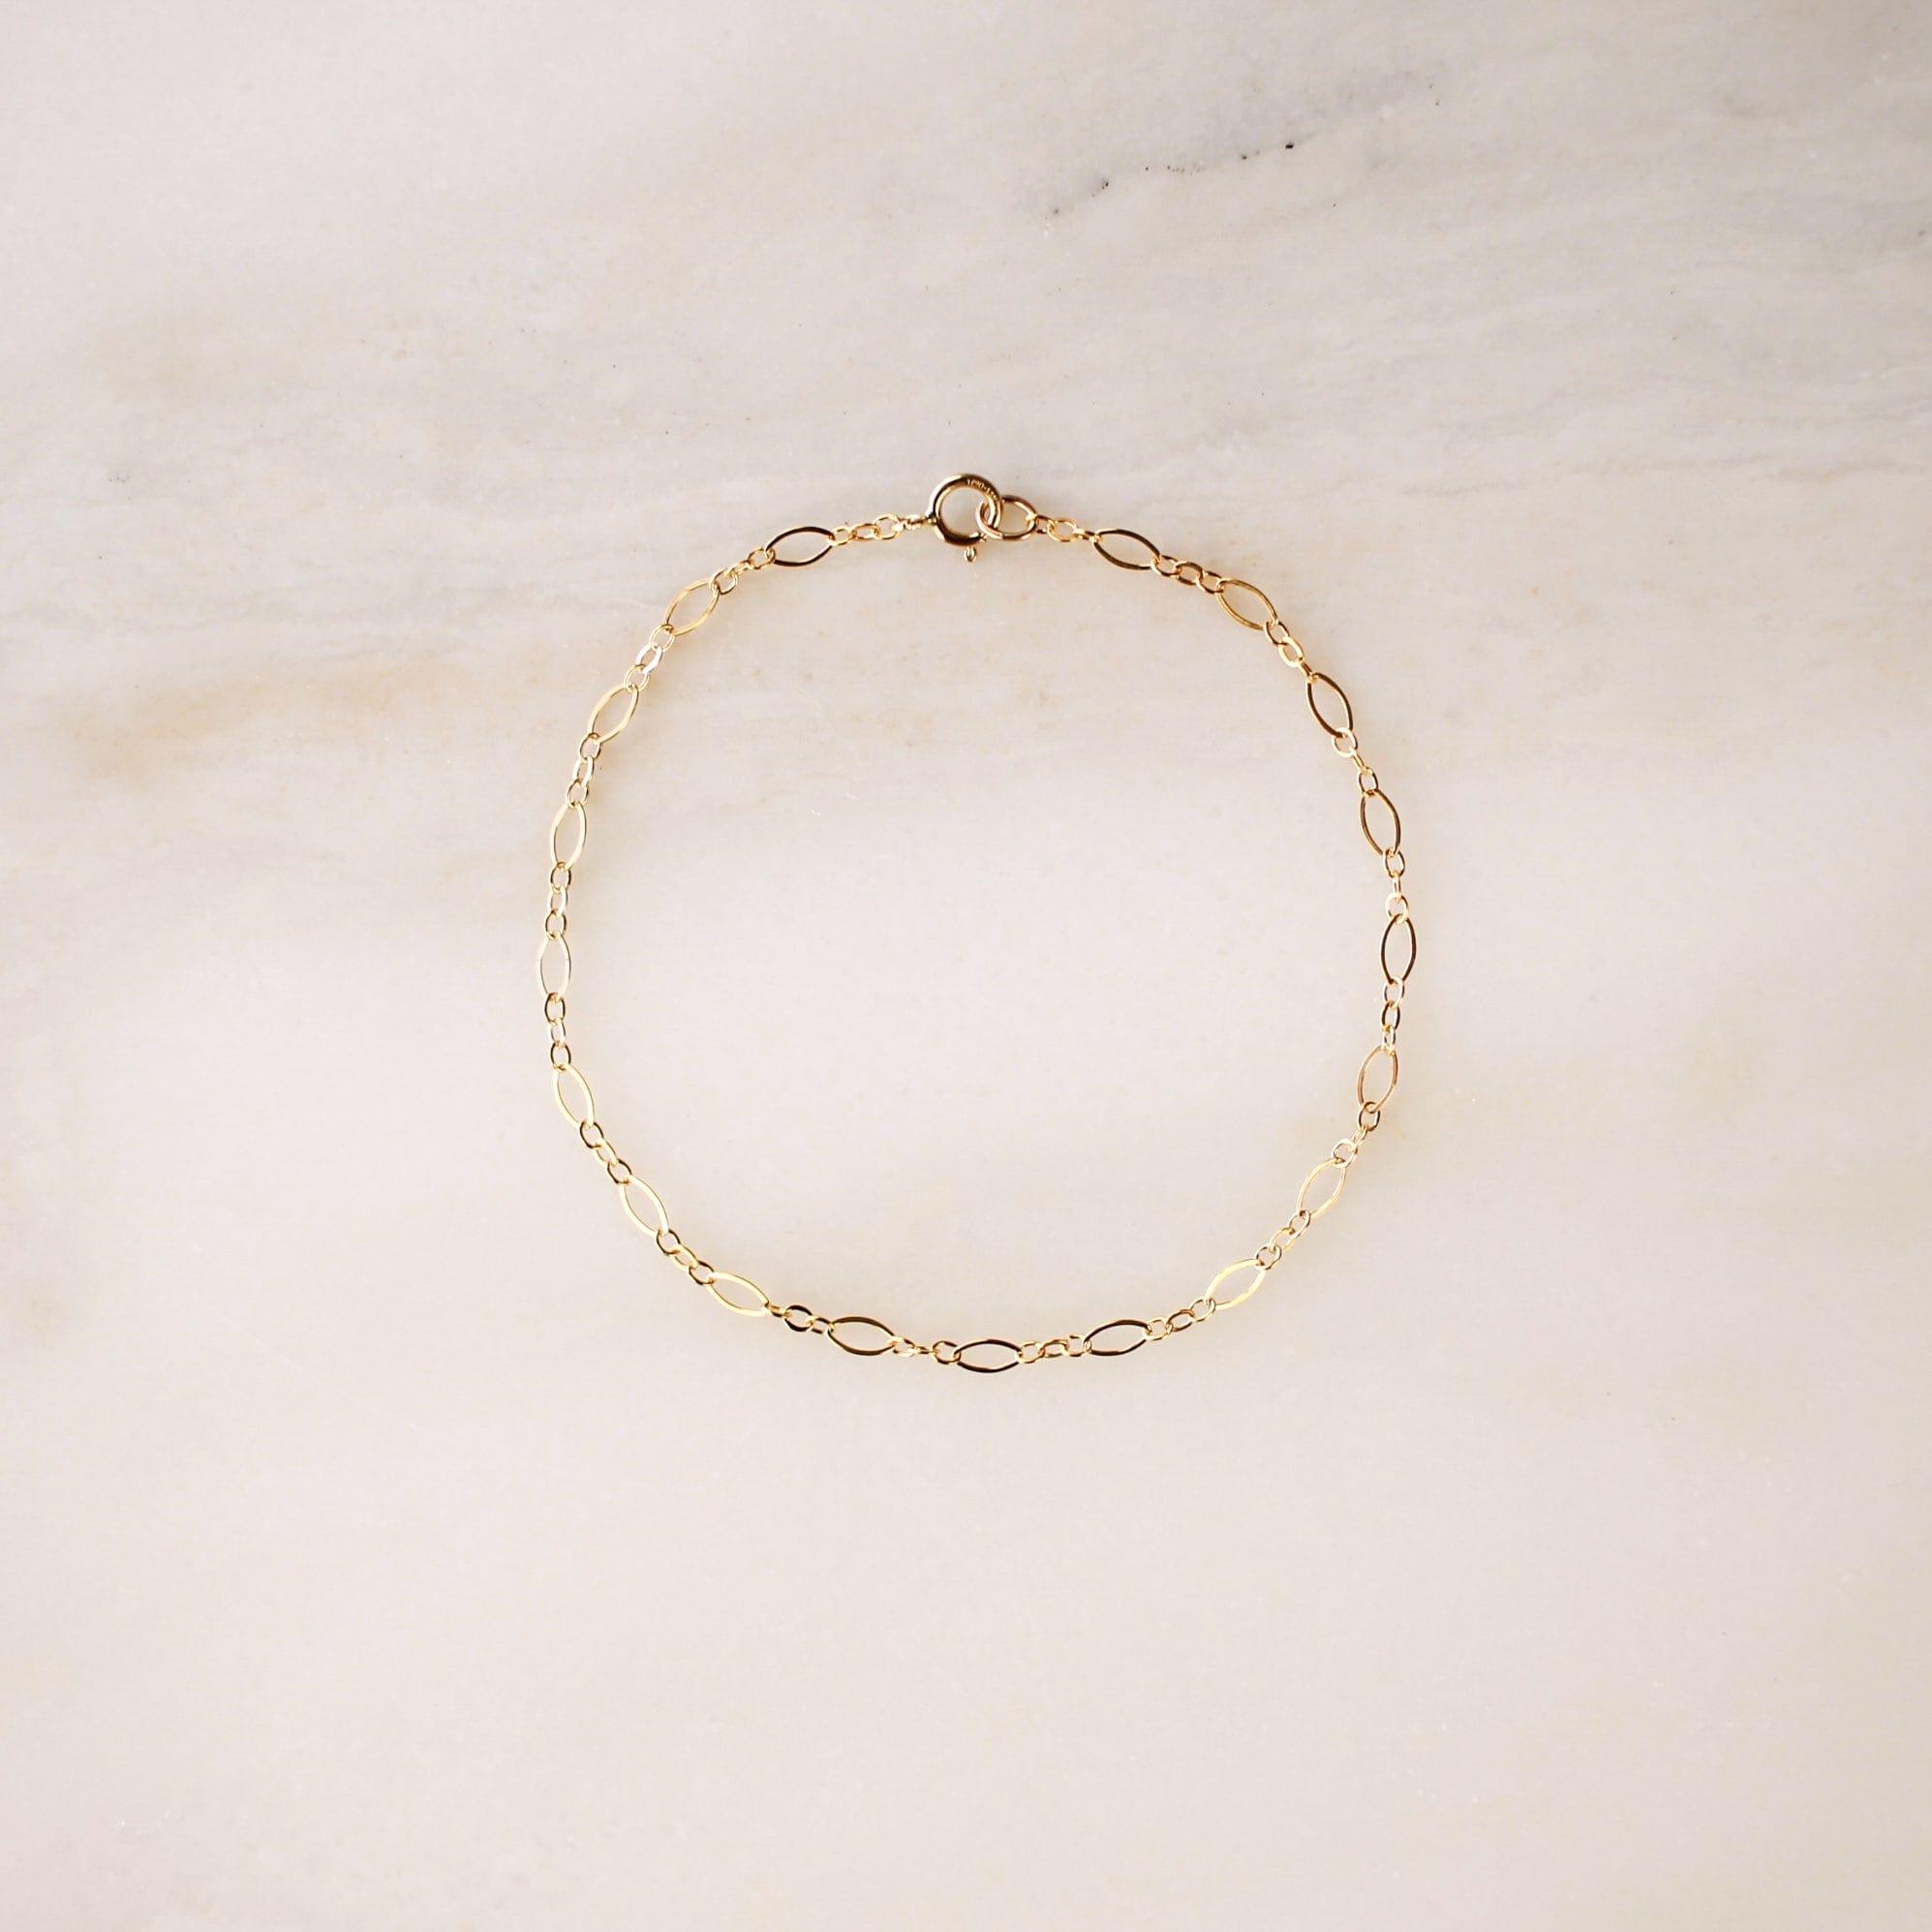 Sweet Chain Bracelet - Nolia Jewelry - Meaningful + Sustainably Handcrafted Jewelry